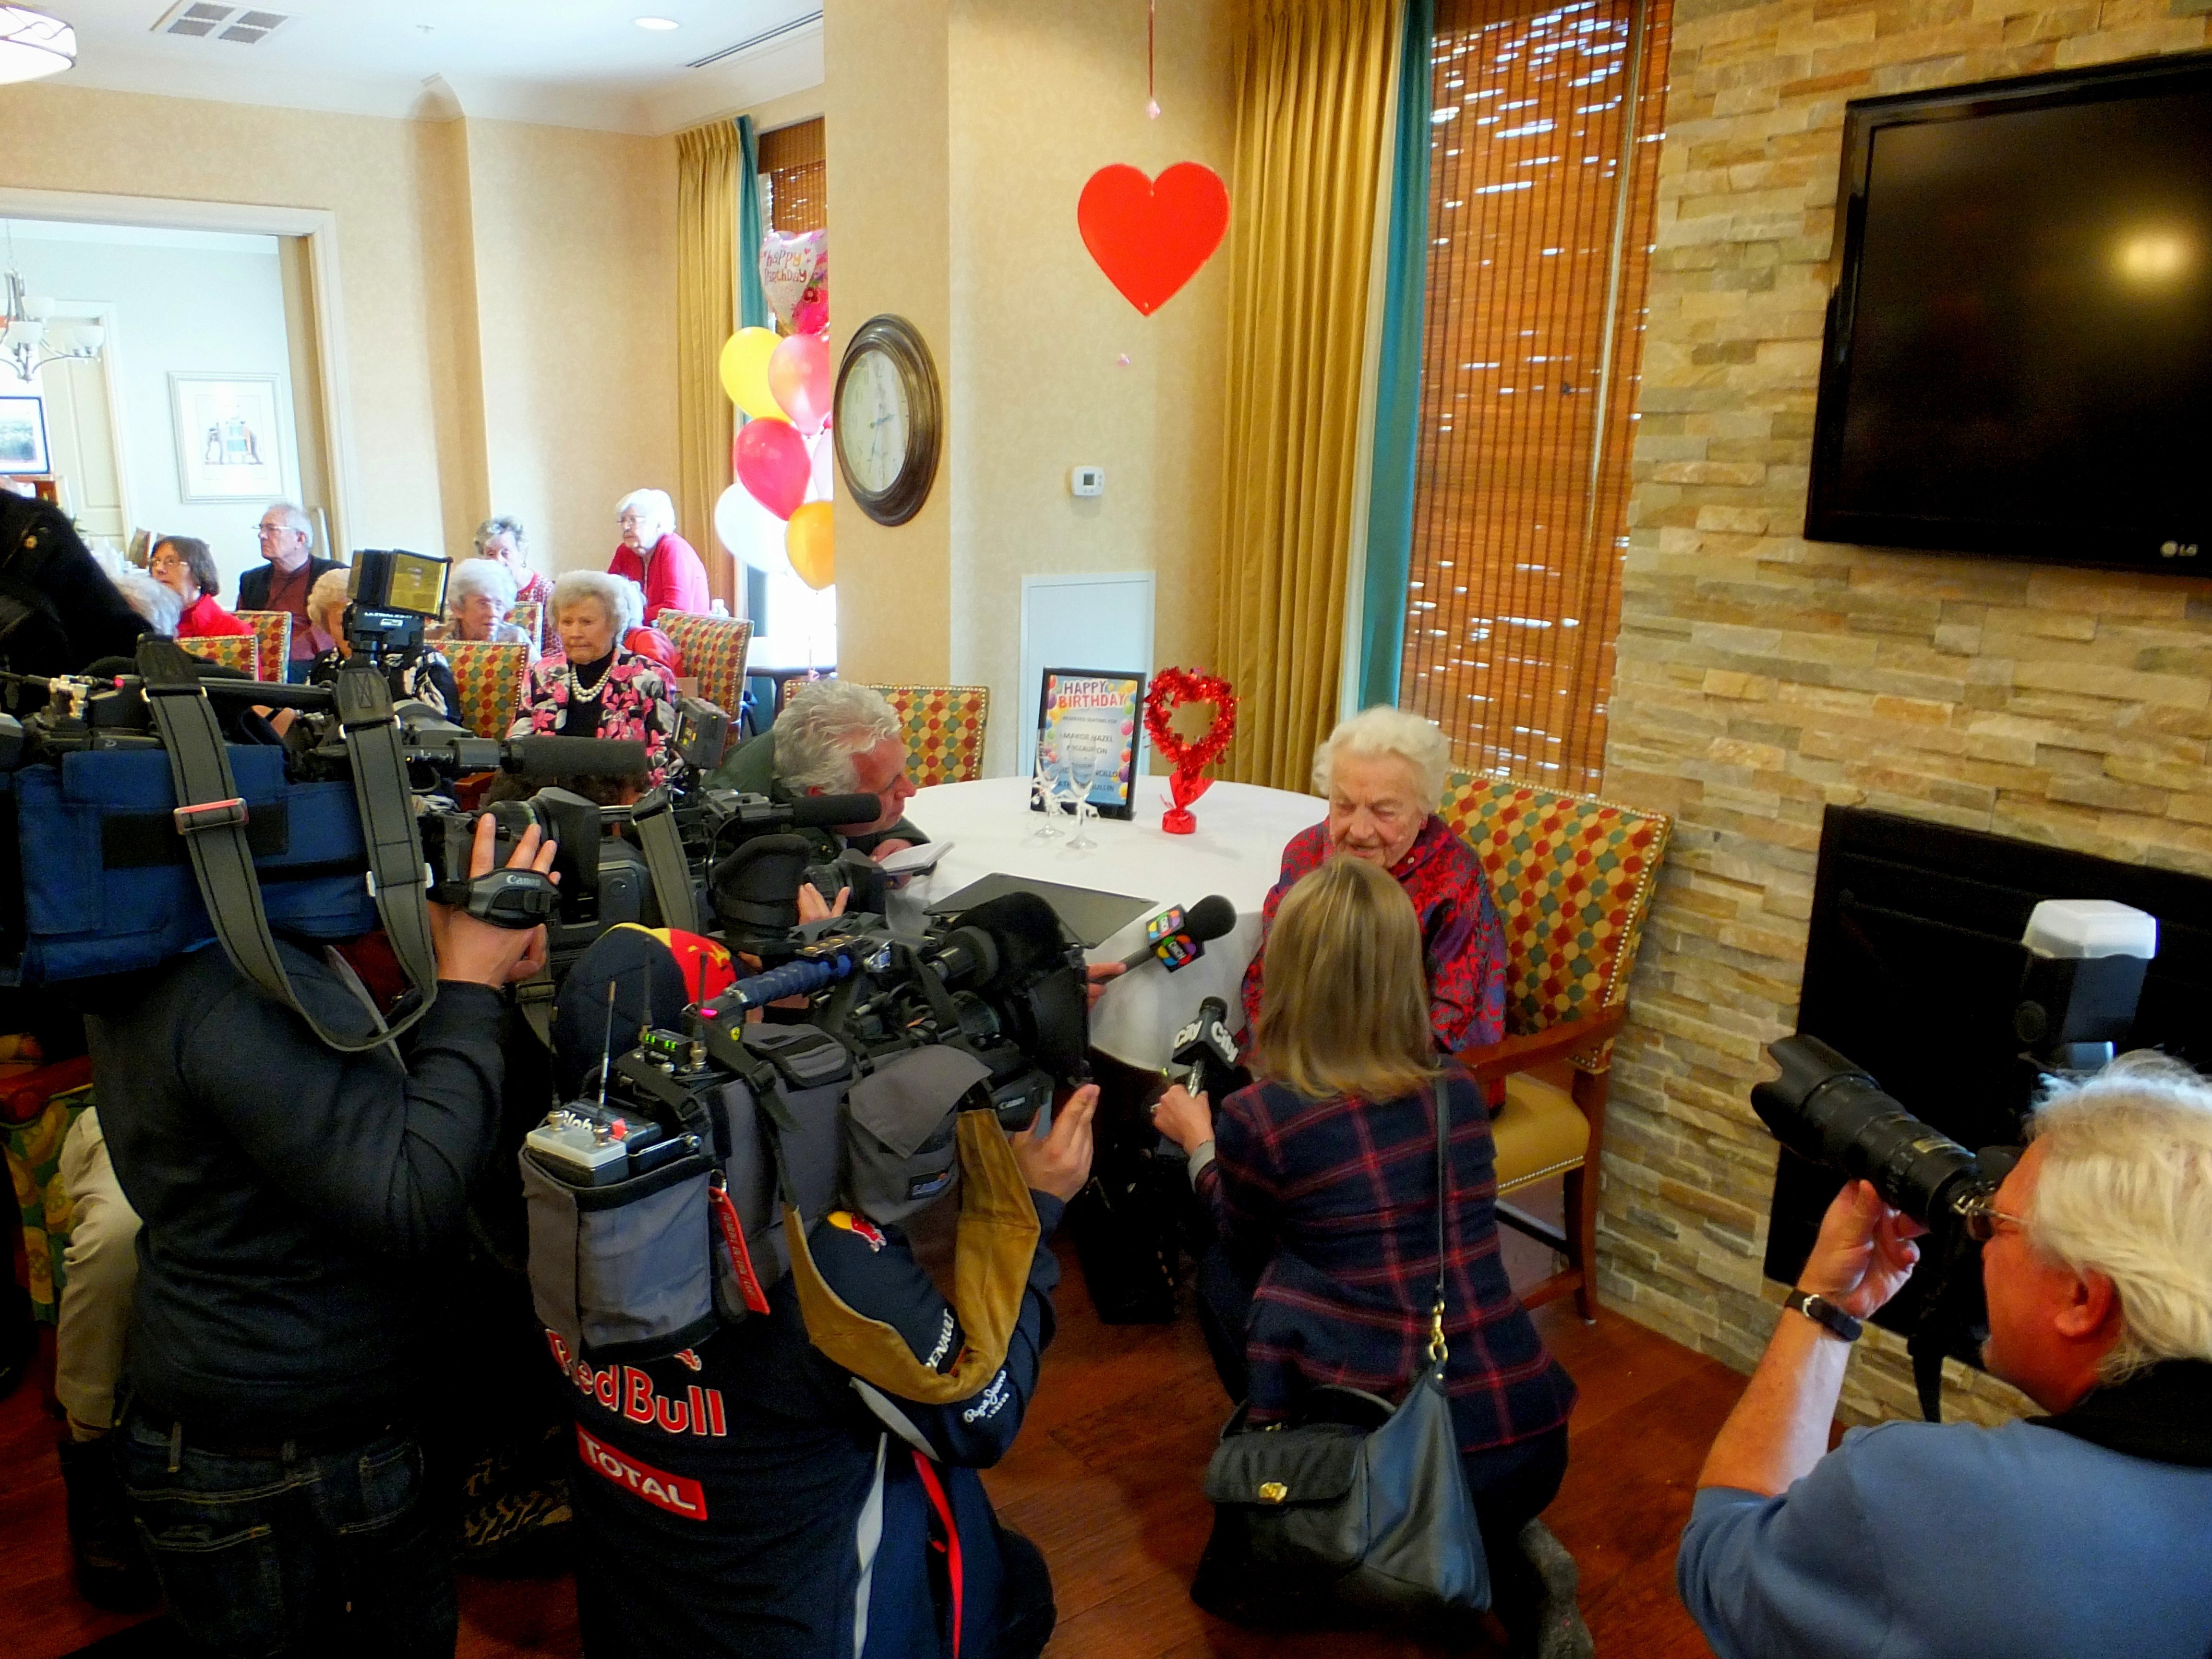 Mayor Hazel McCallion being interviewed by media: CHCH, City TV, Global News at Walden Circle, Photo by I Lee, Feb. 14, 2014